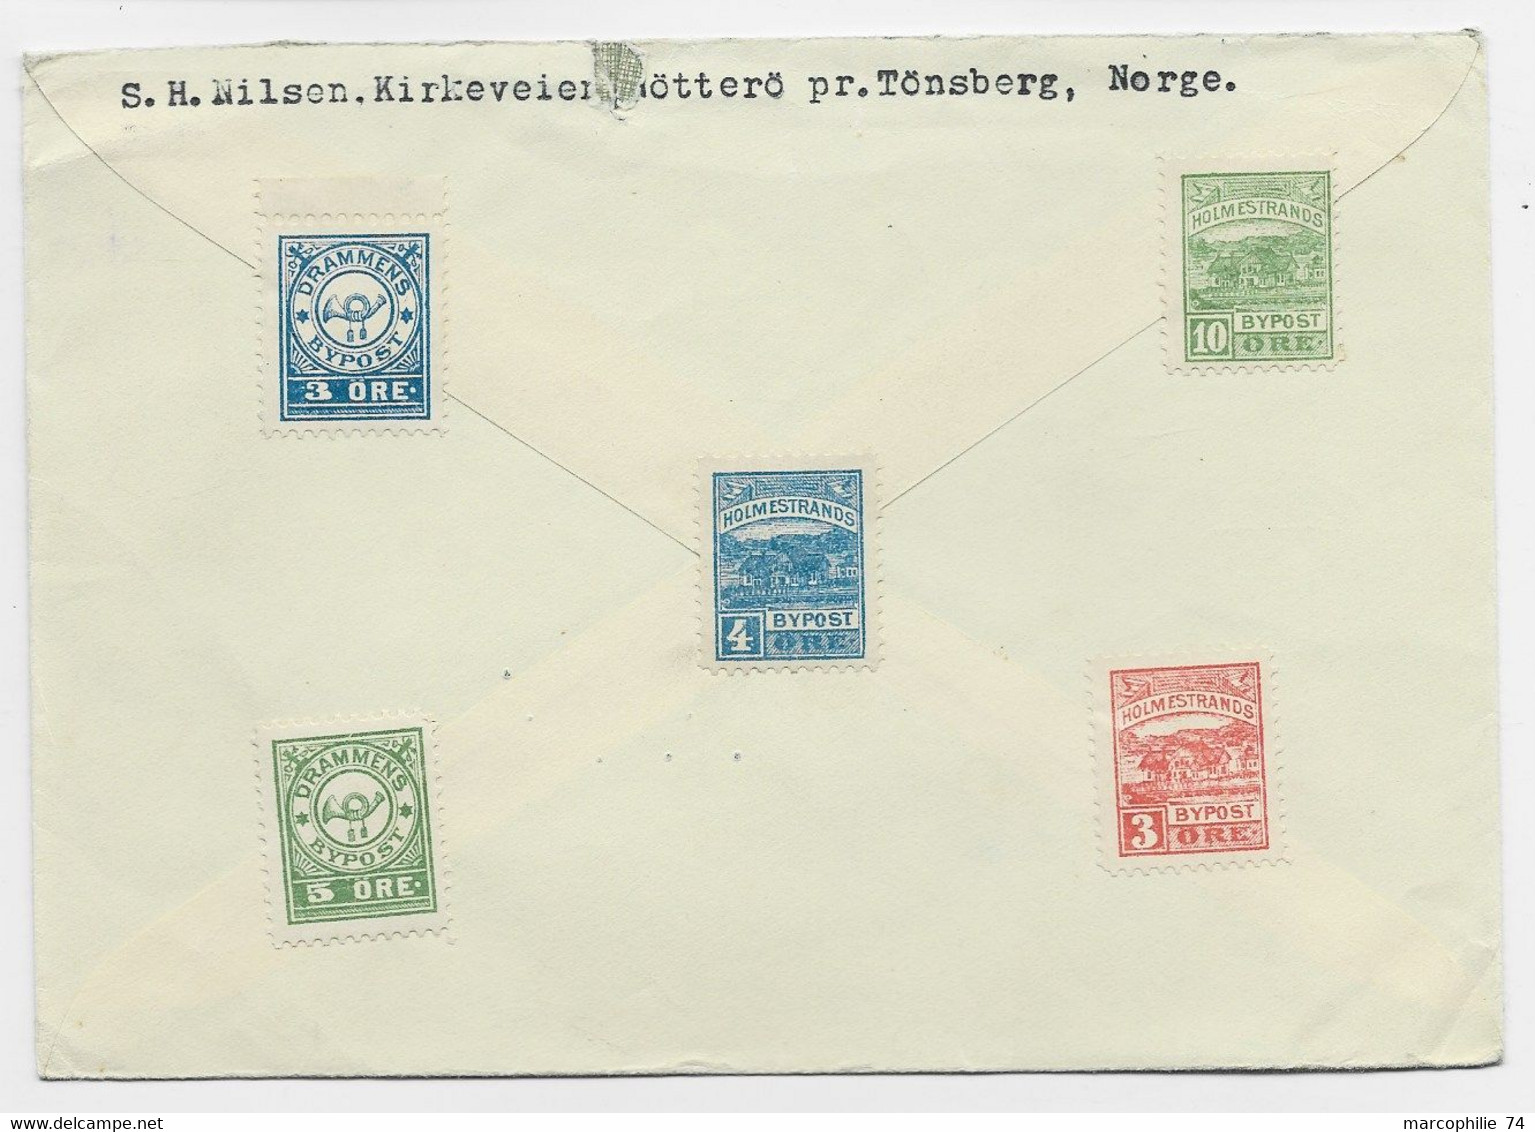 NORGE NORWAY LETTRE COVER TONSBERG 10.1.1955 TO USA - Covers & Documents